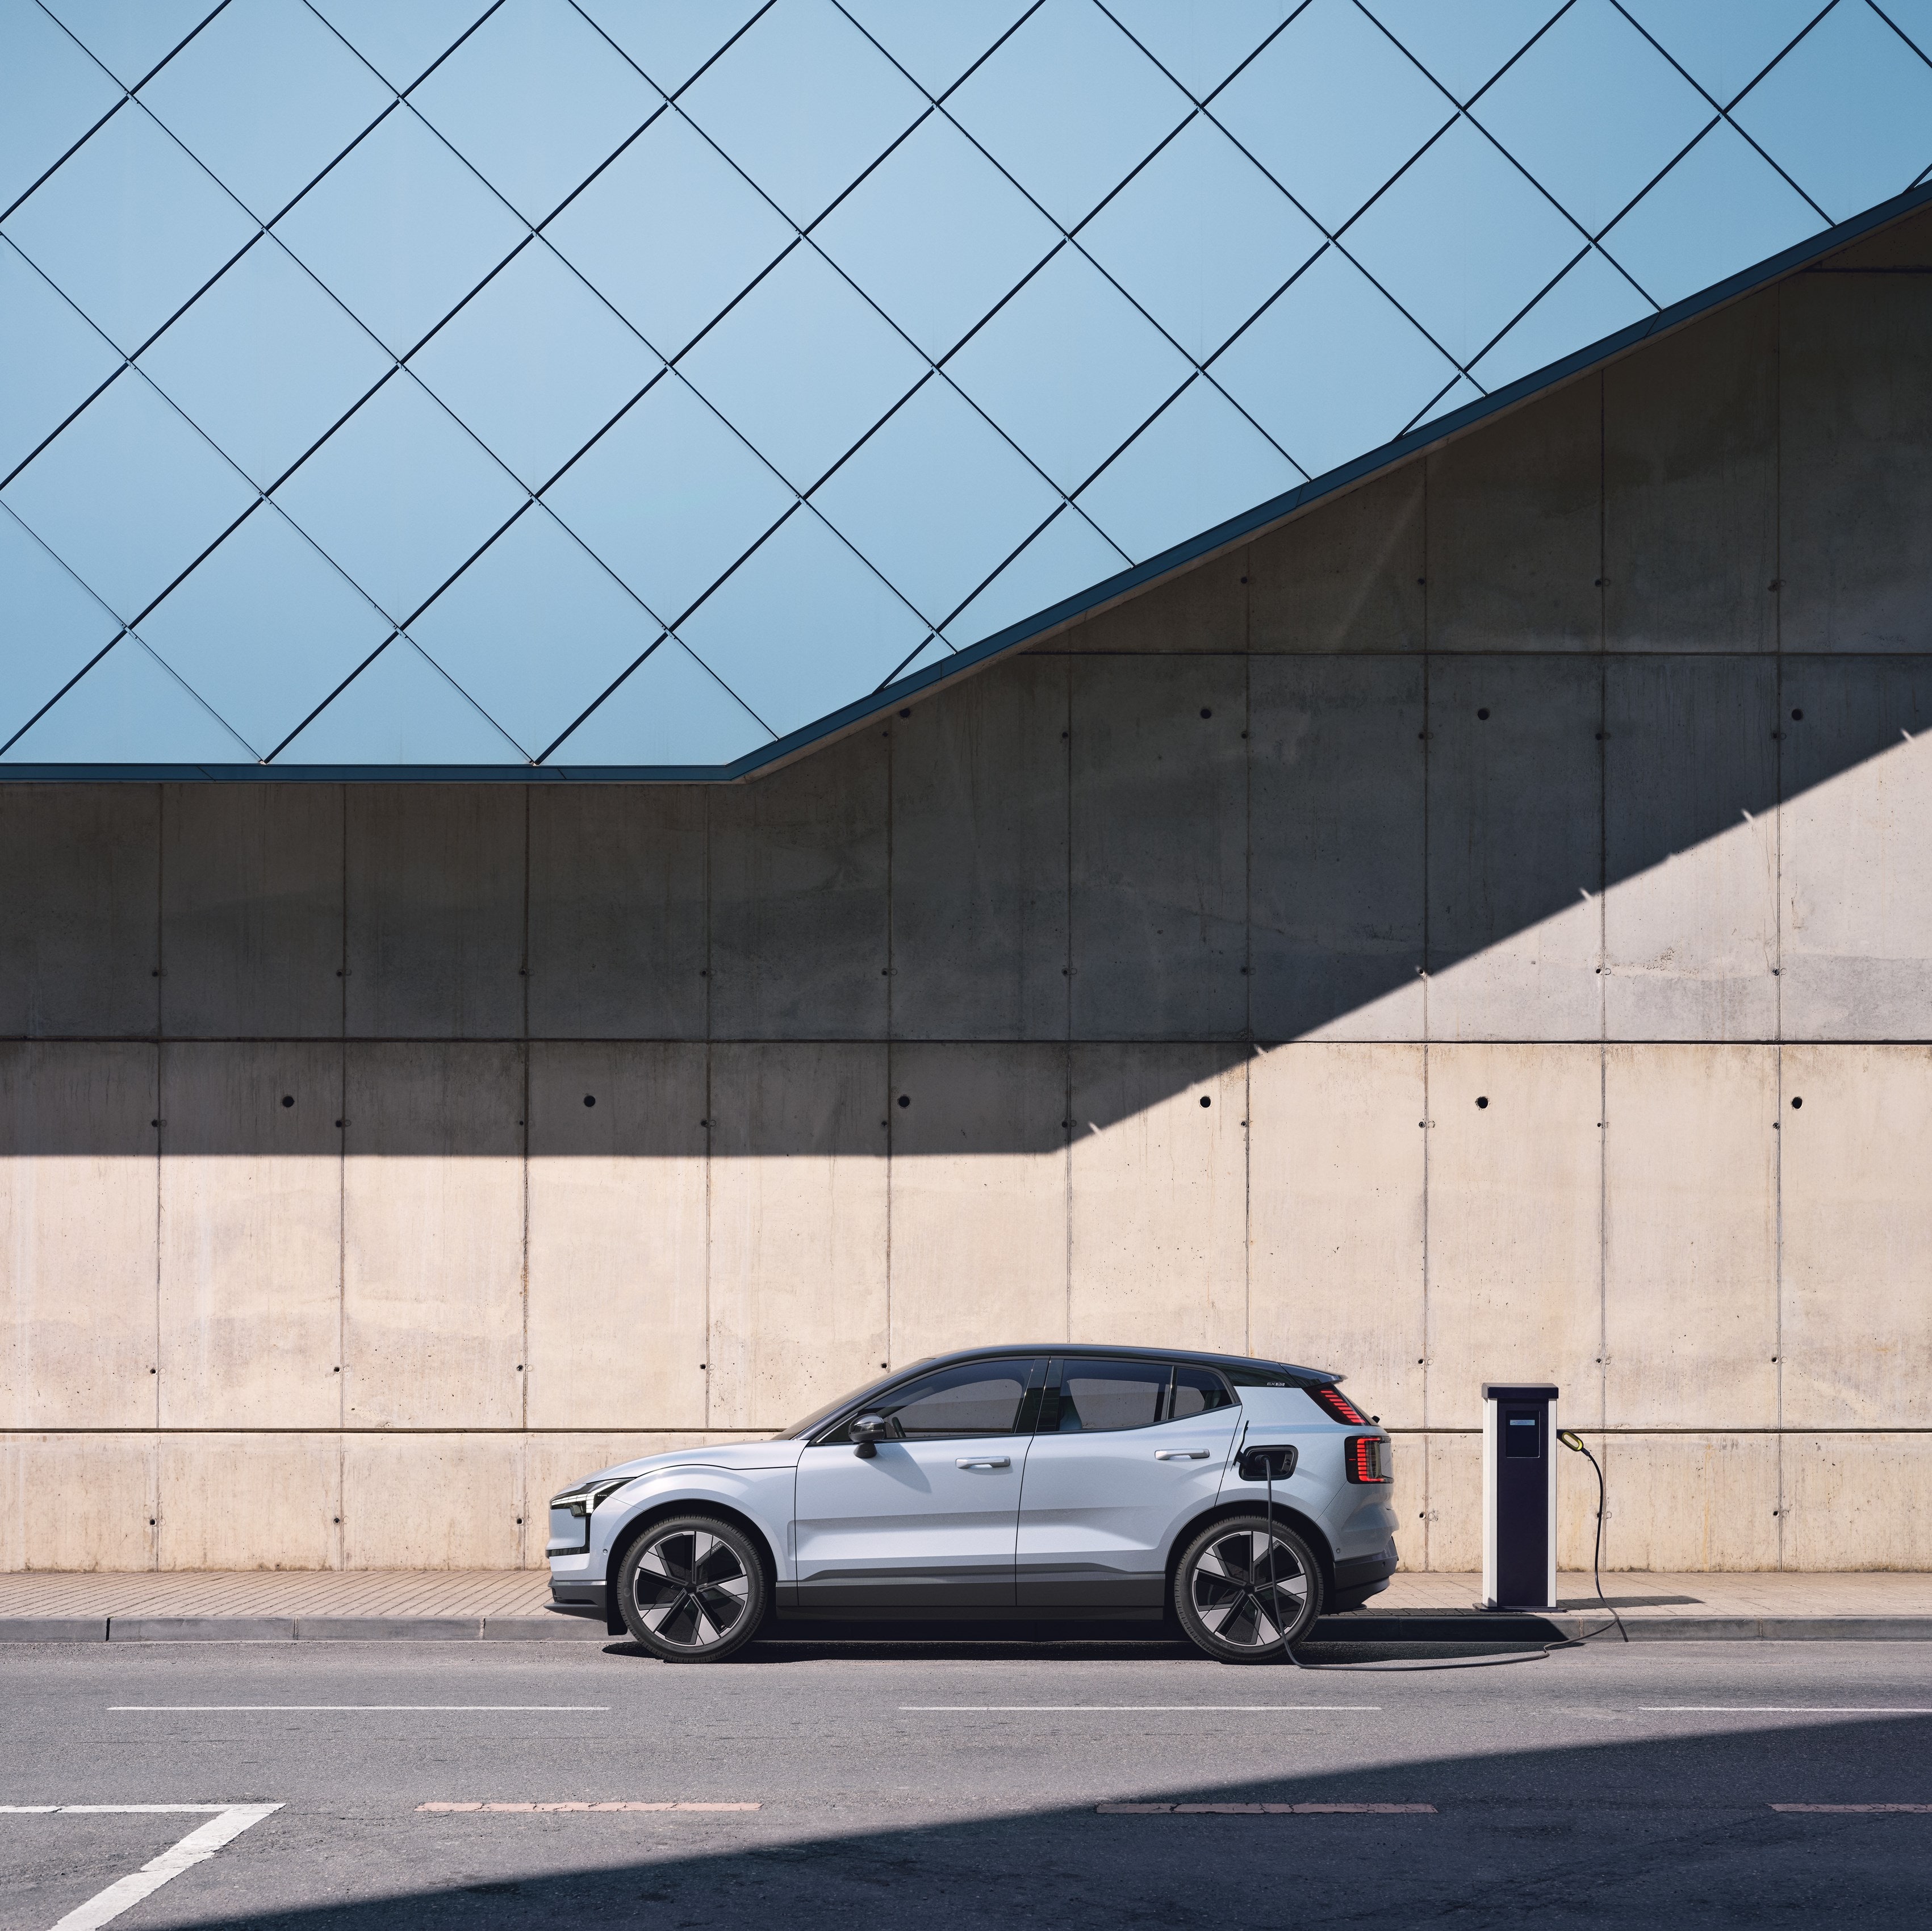 This <a href="https://www.autoblog.com/2023/09/19/volvo-ex30-deep-dive-designing-a-budget-suv/">charming, affordable cutie</a> is a key part of Volvo’s electrification strategy. It will attempt to significantly grow the brand’s EV volume while redefining modern ideas of luxury with fresh exterior design and recycled and upcycled interior materials made from old denim, window frames, plastic bottles, and fishing nets. <em><strong>$36,145 - 275 Miles</strong></em><p>Sign up for our newsletter to get the latest in design, decorating, celebrity style, shopping, and more.</p><a href="https://www.architecturaldigest.com/newsletter/subscribe?sourceCode=msnsend">Sign Up Now</a>